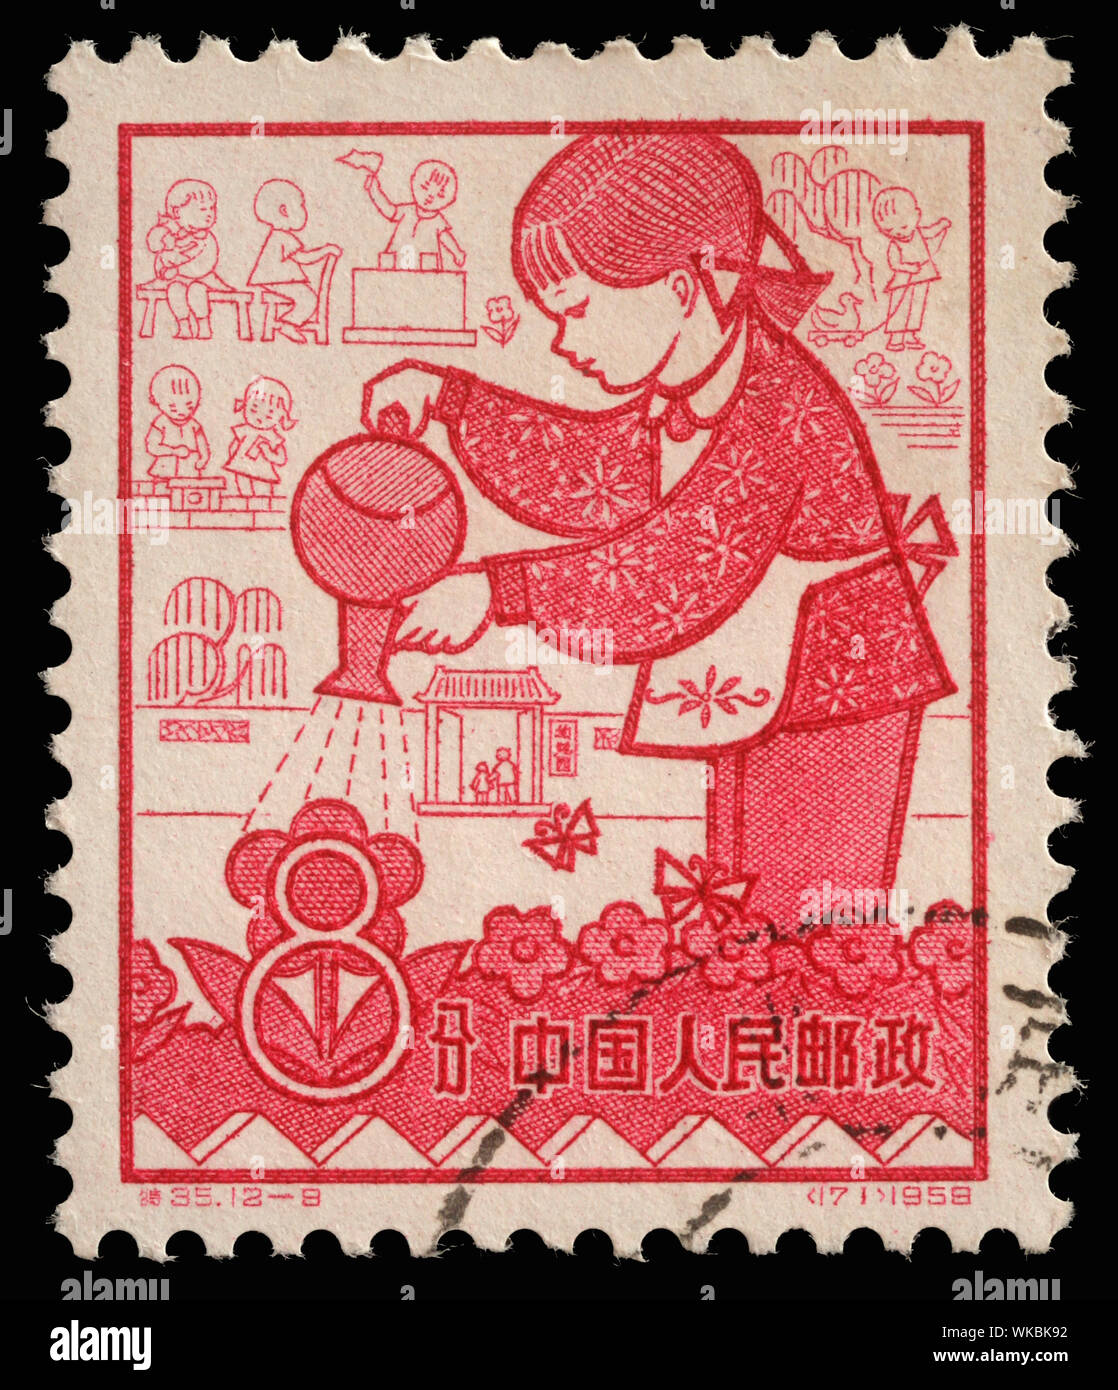 Stamp issued in the China shows Nursery, the 1st Anniversary of People's Communes, circa 1959. Stock Photo